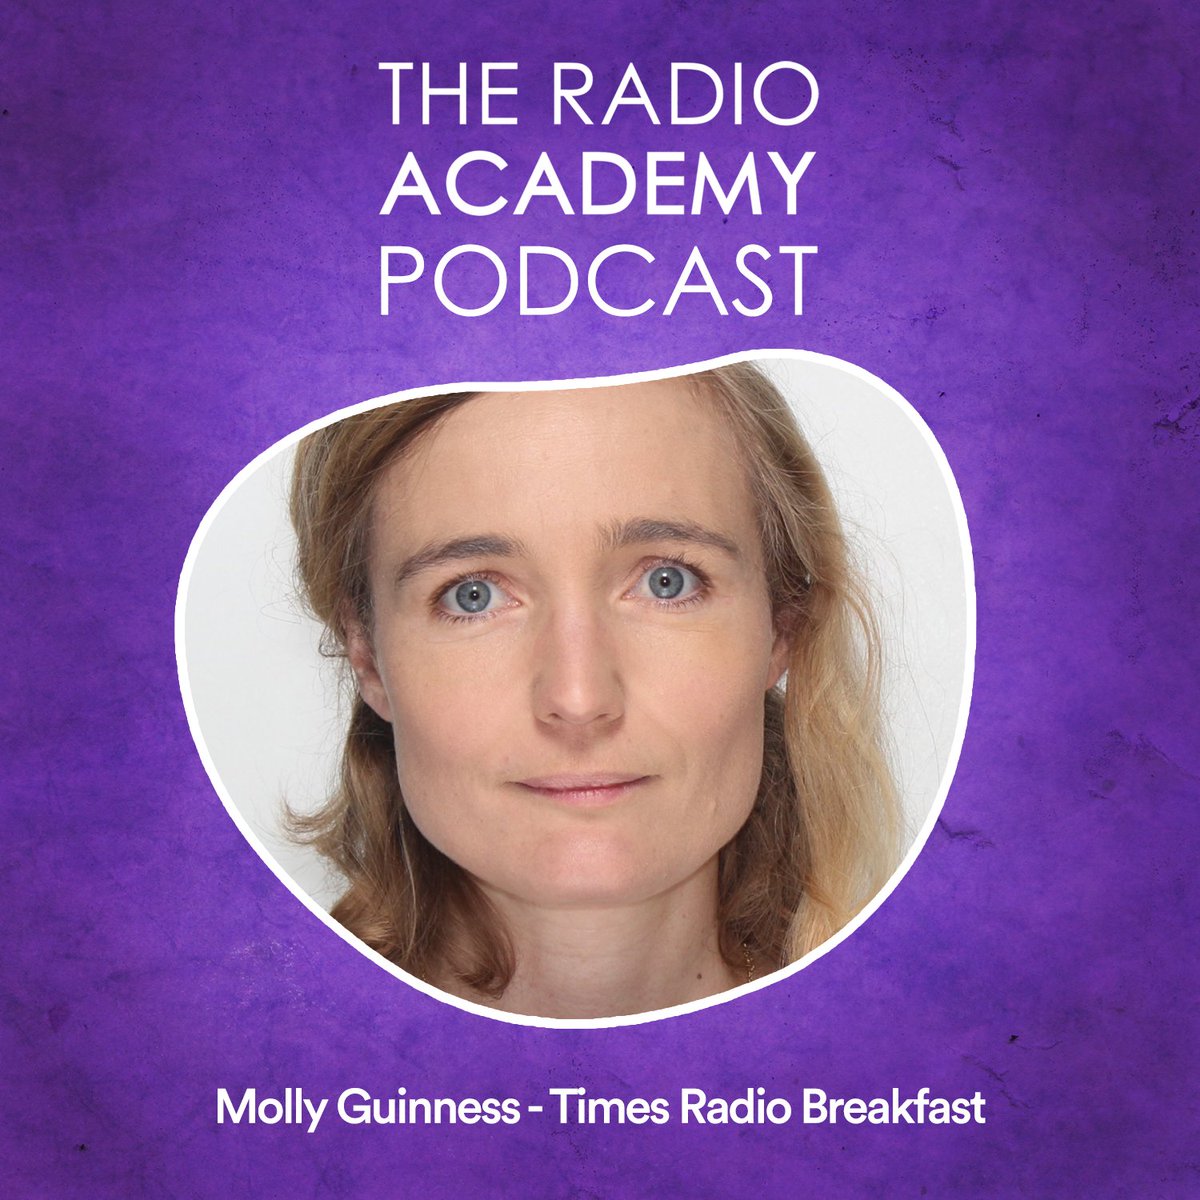 Podcast: Molly Guinness - Time Radio Breakfast audioboom.com/posts/8498290 from @RadioAcademy